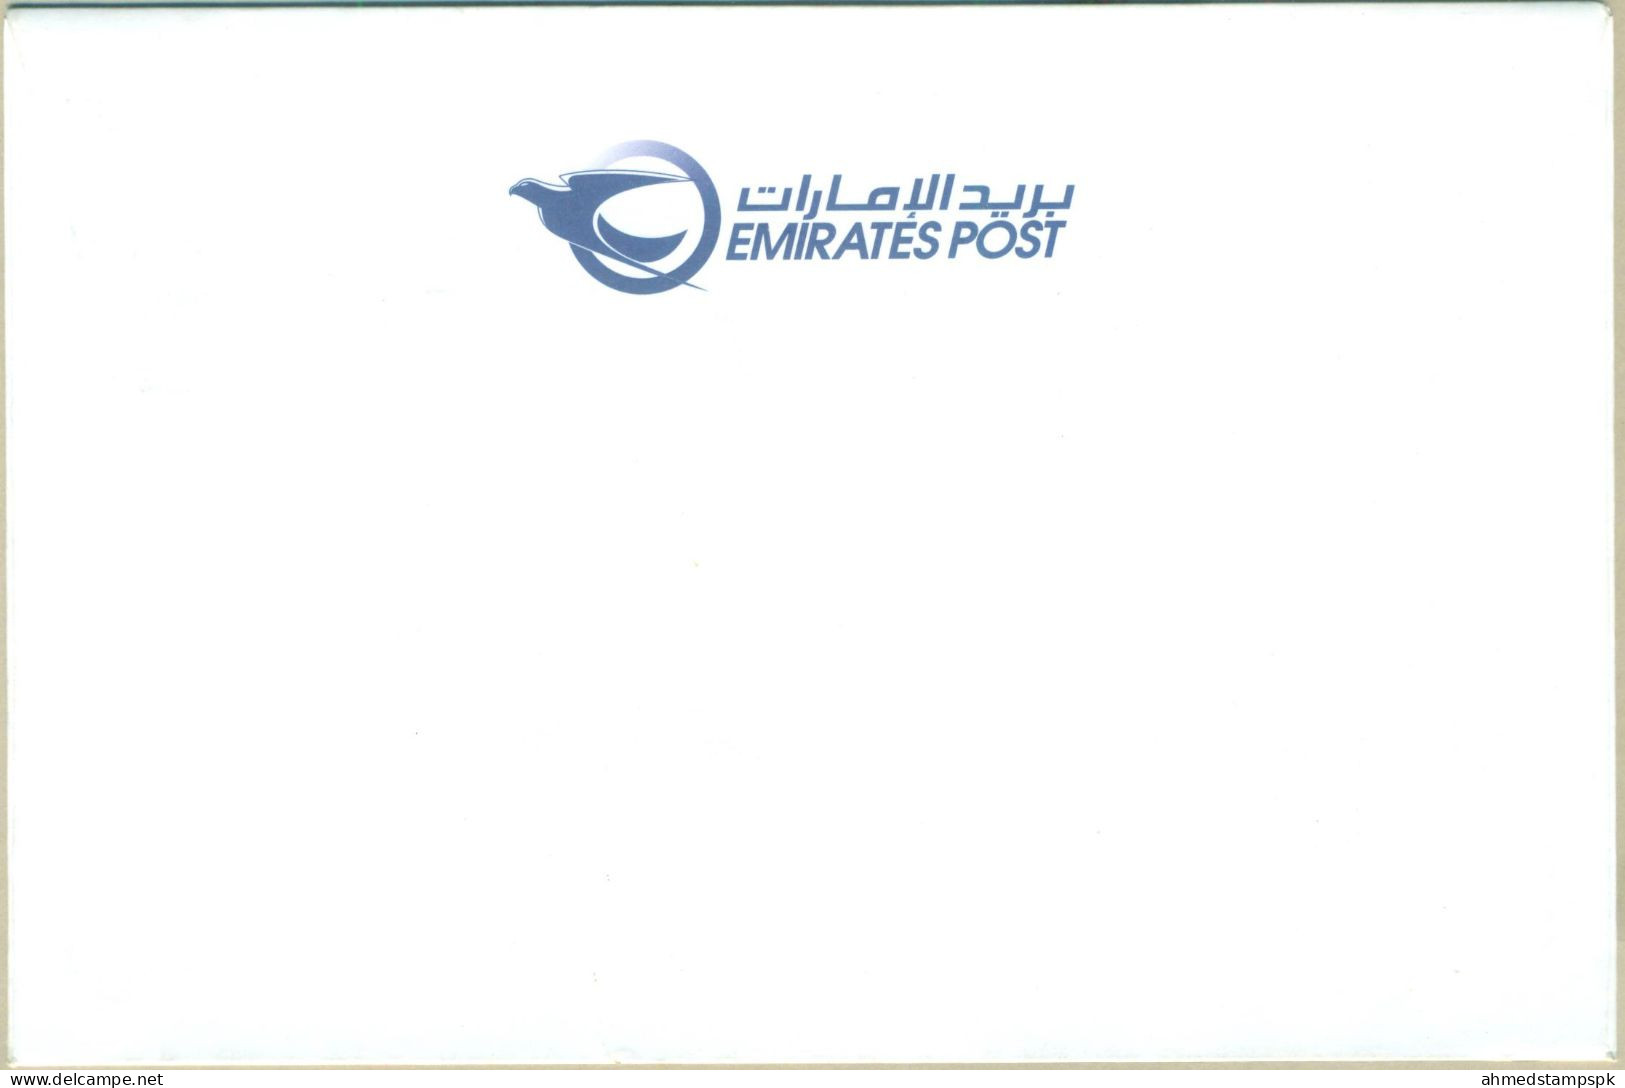 UAE UNITED ARAB EMIRATES FDC FIRST DAY COVER 2010 OLD SCHOOLS EDUCATION TEACHER STUDENT - Ver. Arab. Emirate